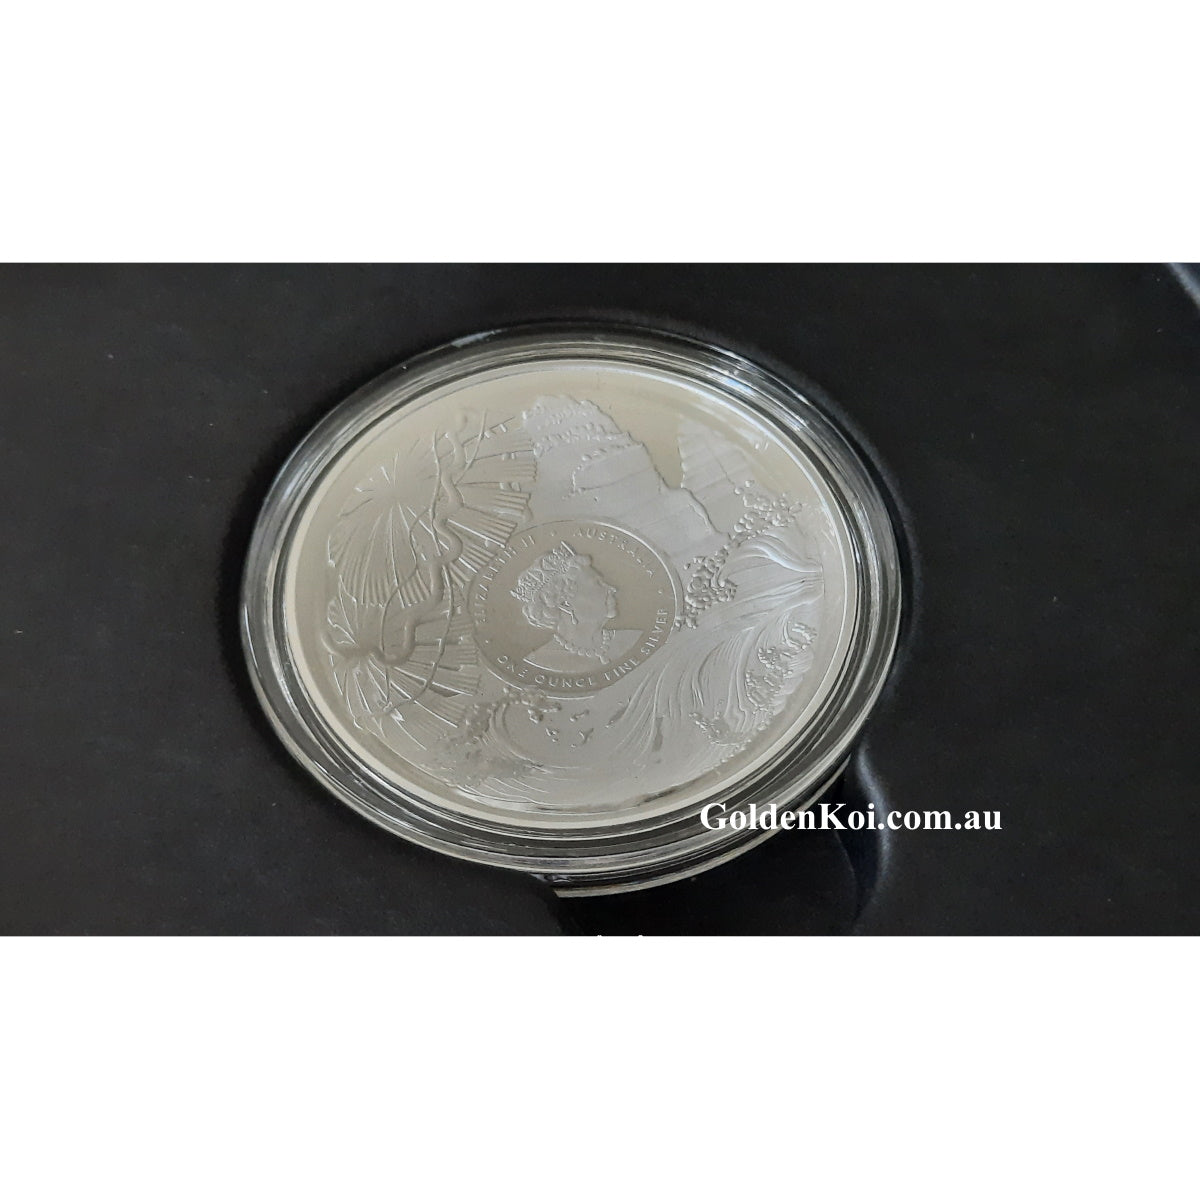 2022 Beauty, Rich & Rare – Great Barrier Reef $5 Silver Coloured Proof Domed Coin